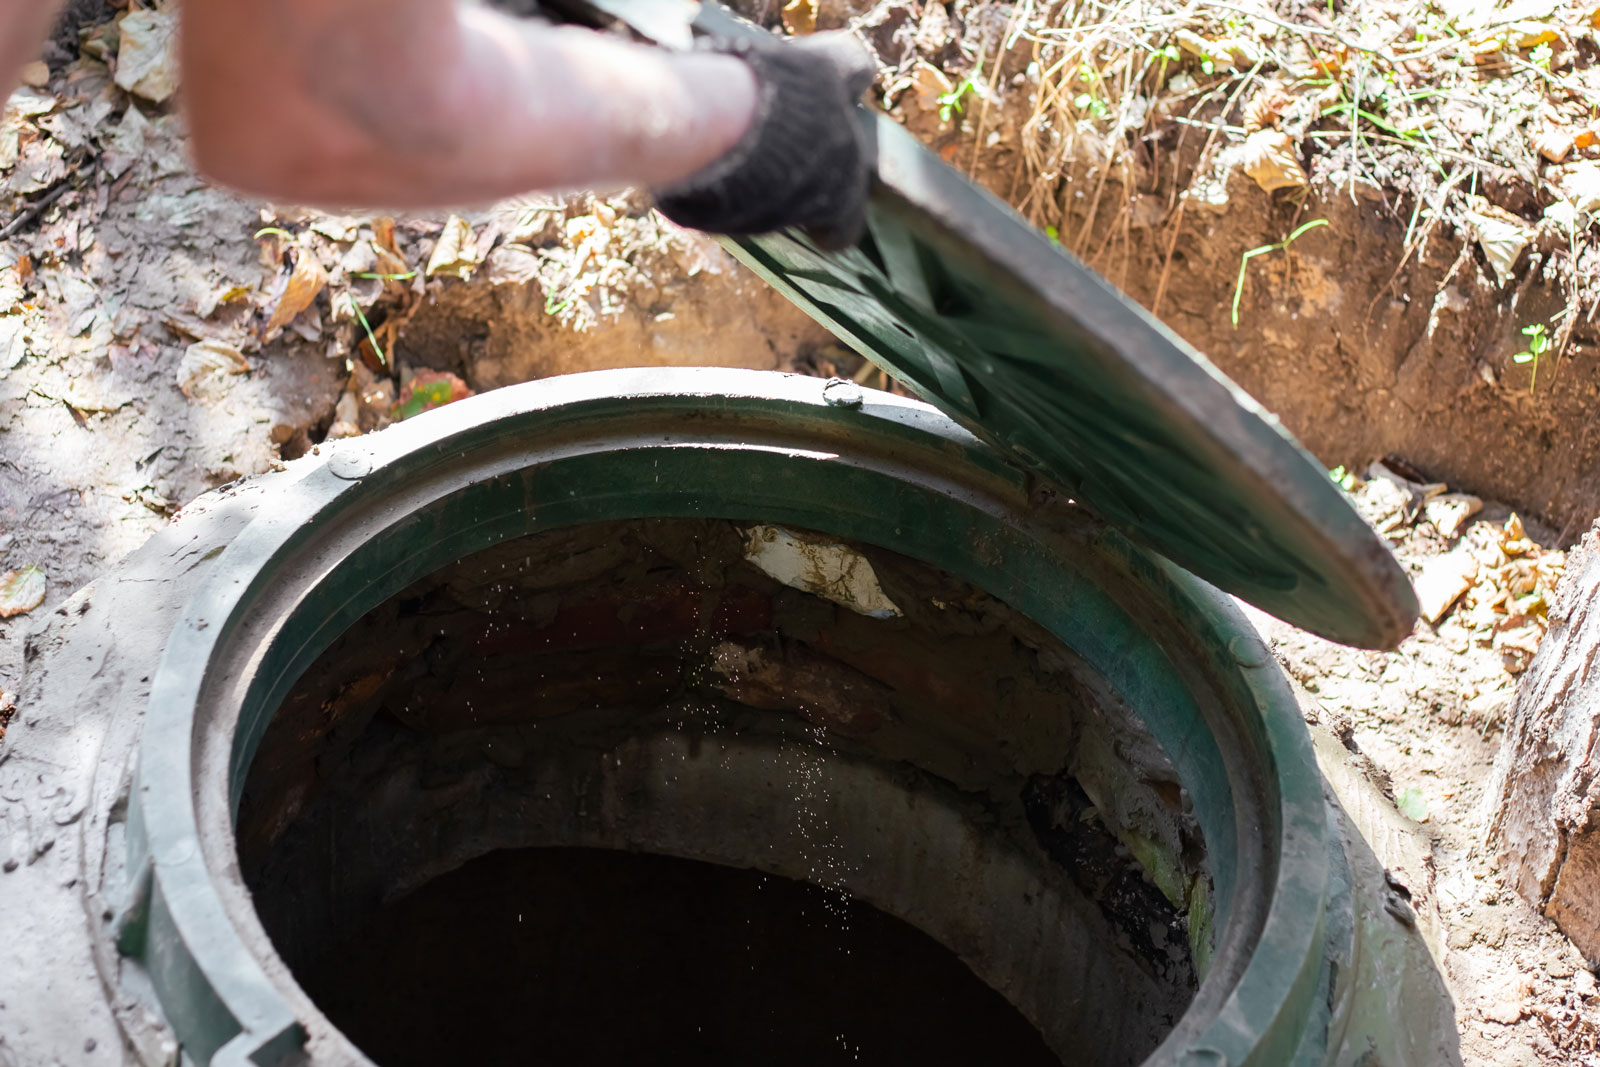 Skilled technician opening a sewer hatch for septic tank inspection and maintenance